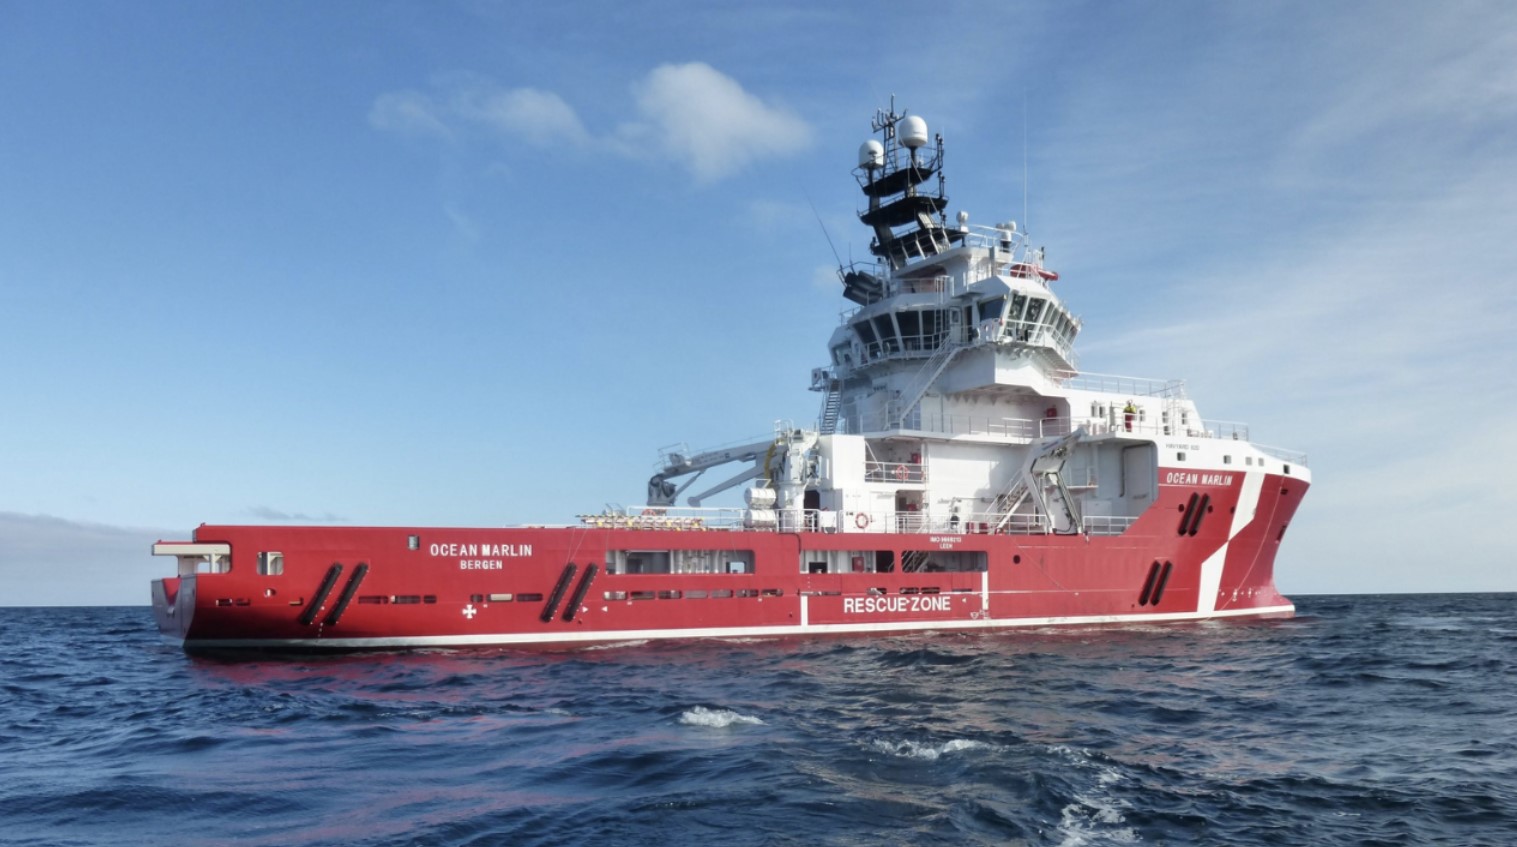 Rescue vessel to undergo makeover to get ready for renewables